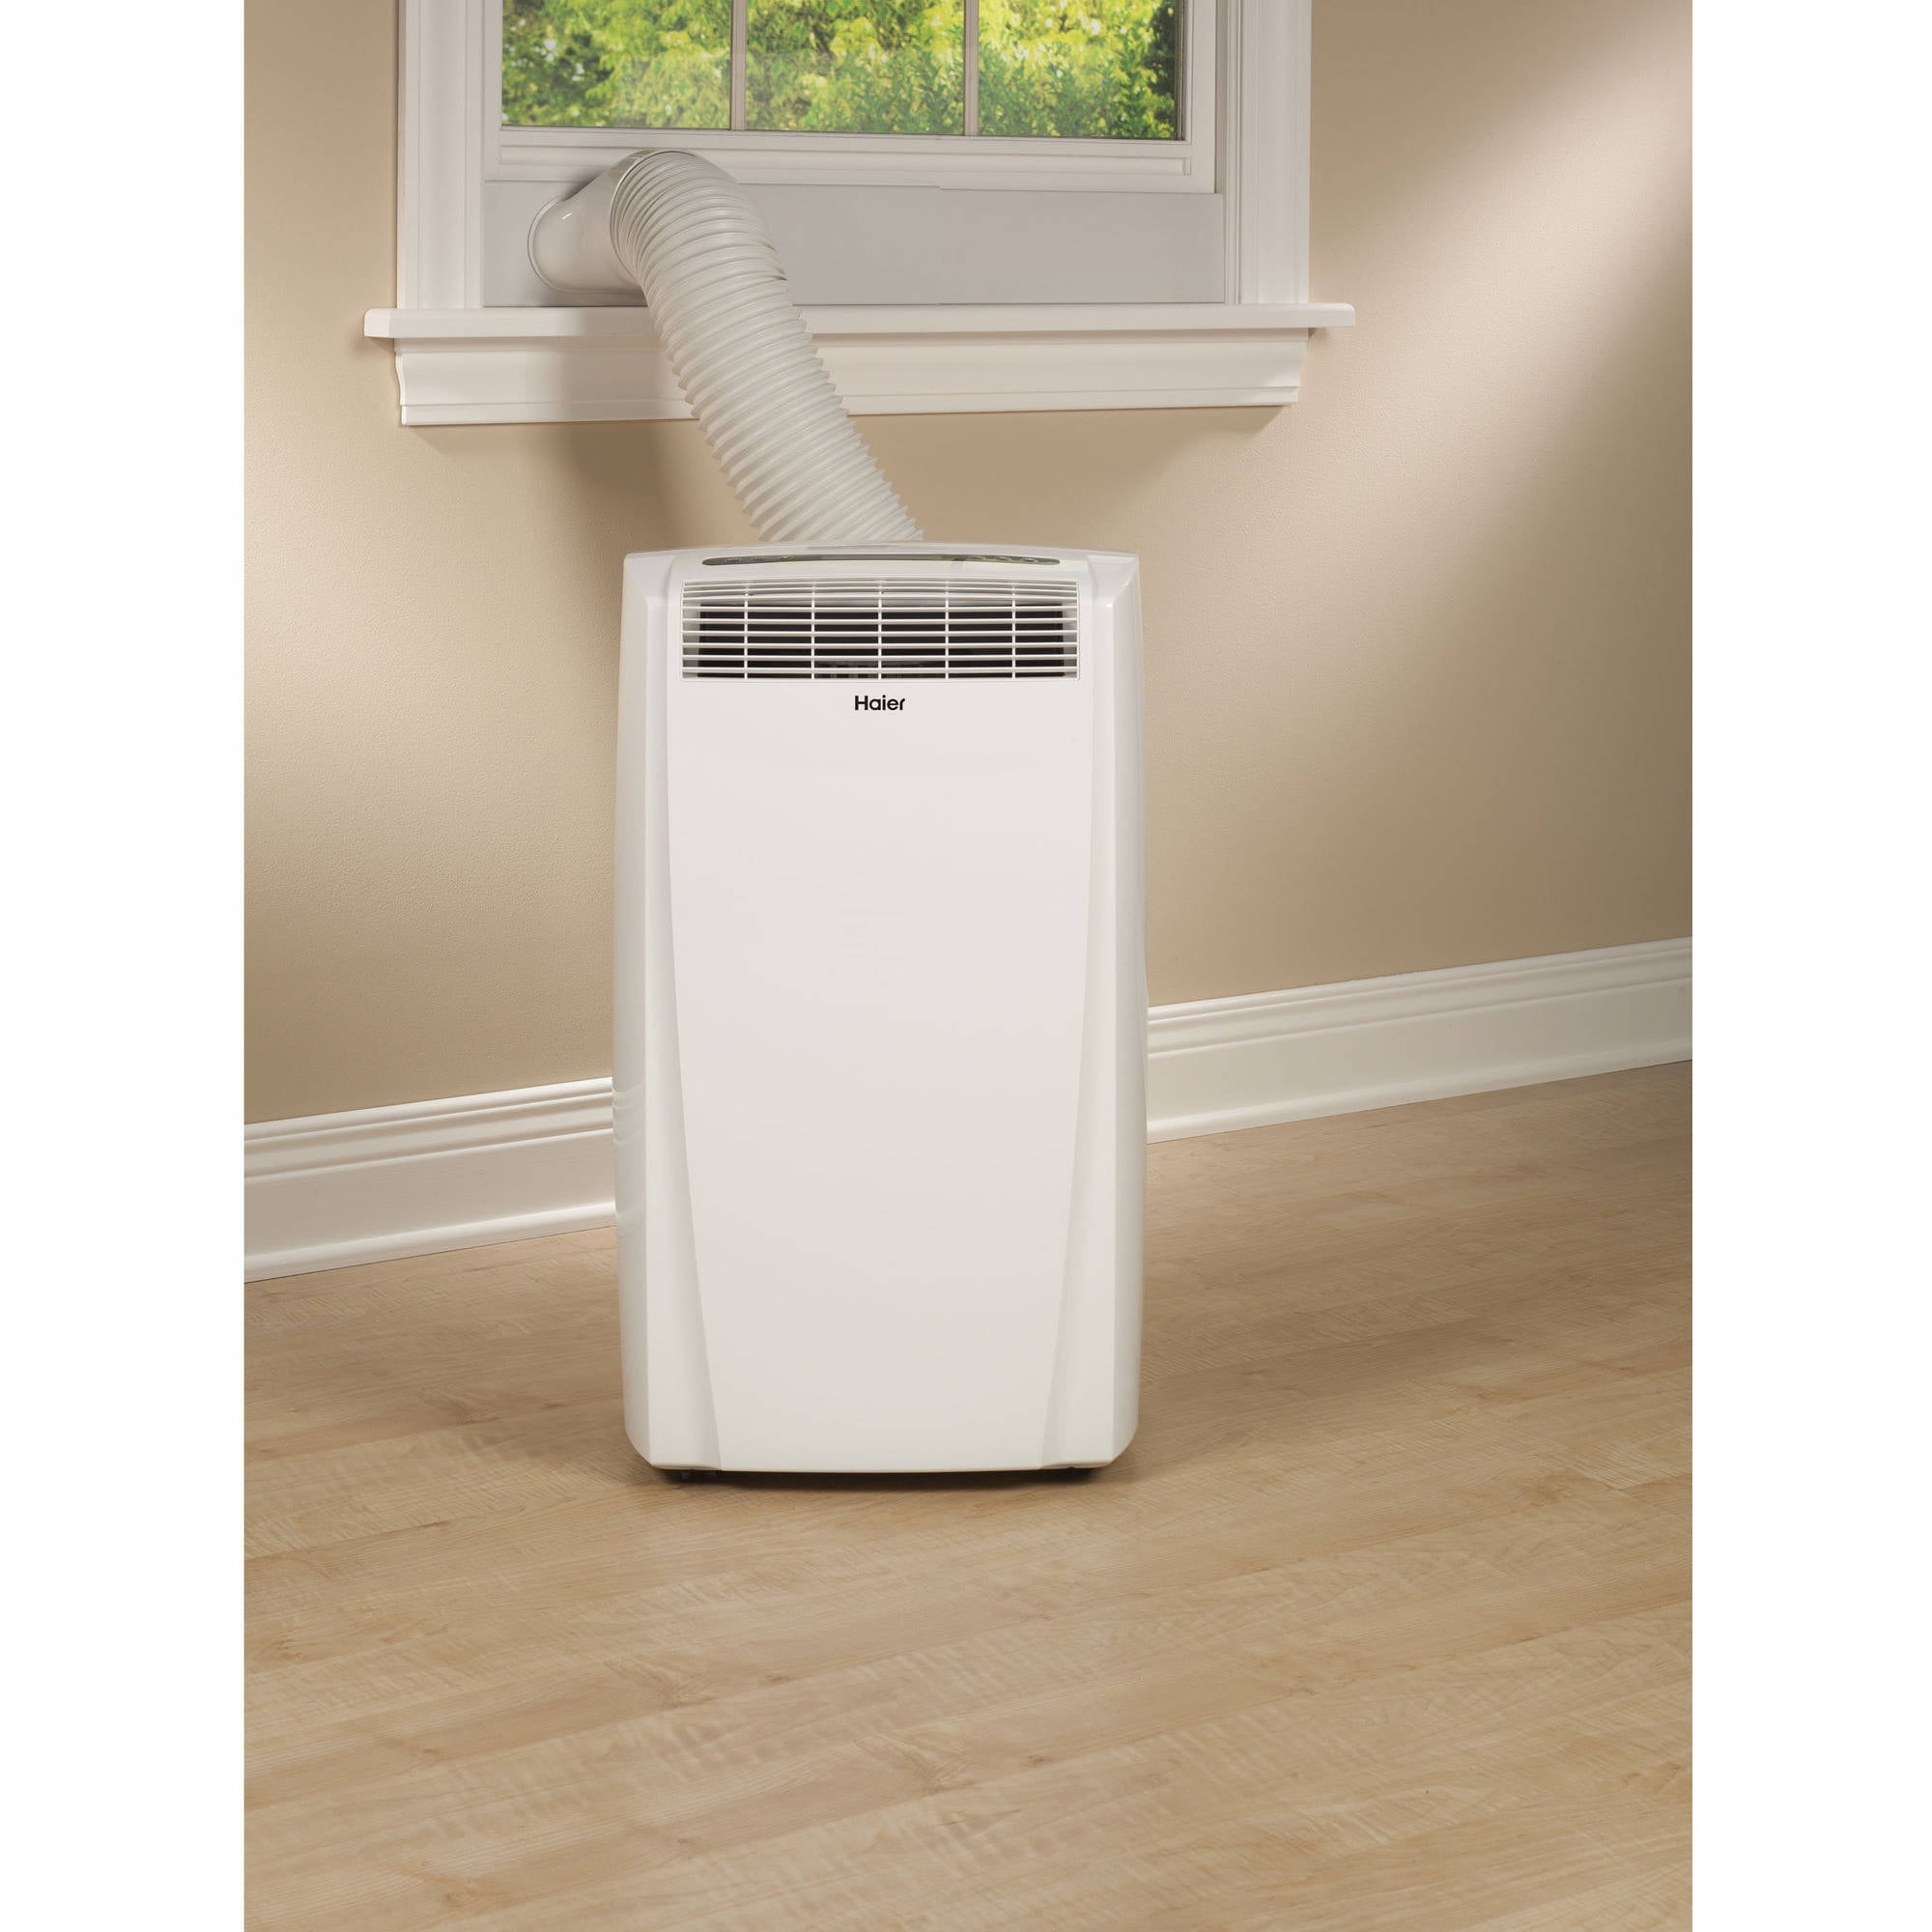 Where can you purchase a Shinco air conditioner?